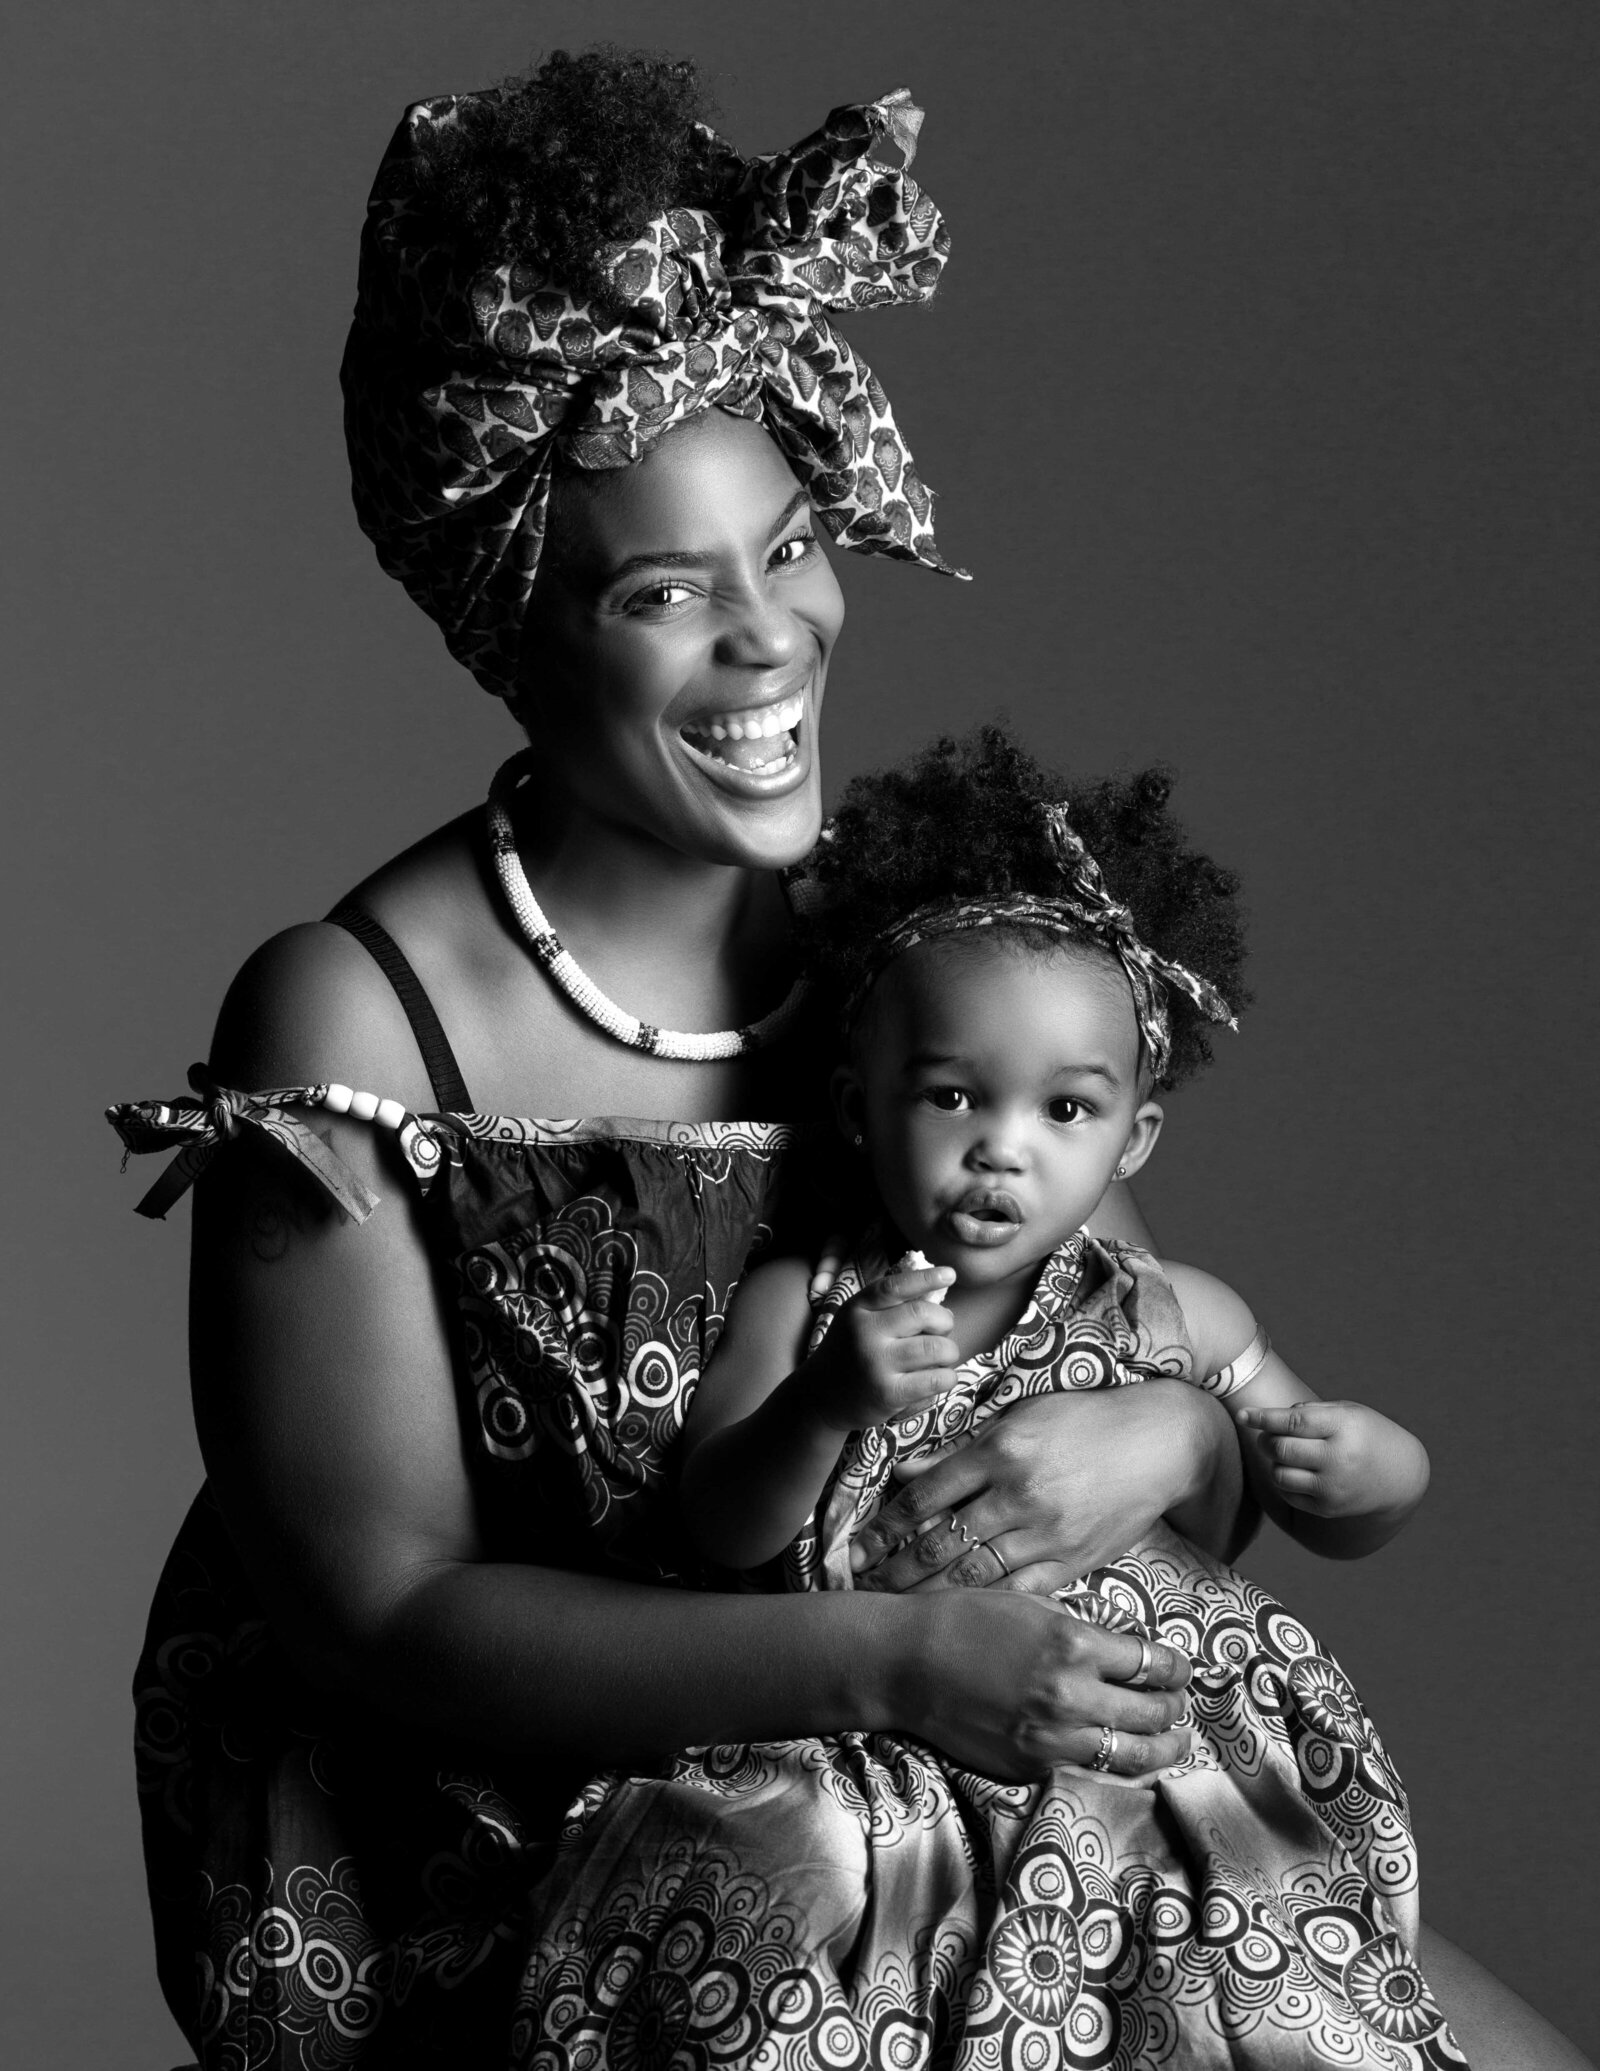 Black and white motherhood portrait of a mother and her daughter by photographer Daisy Rey